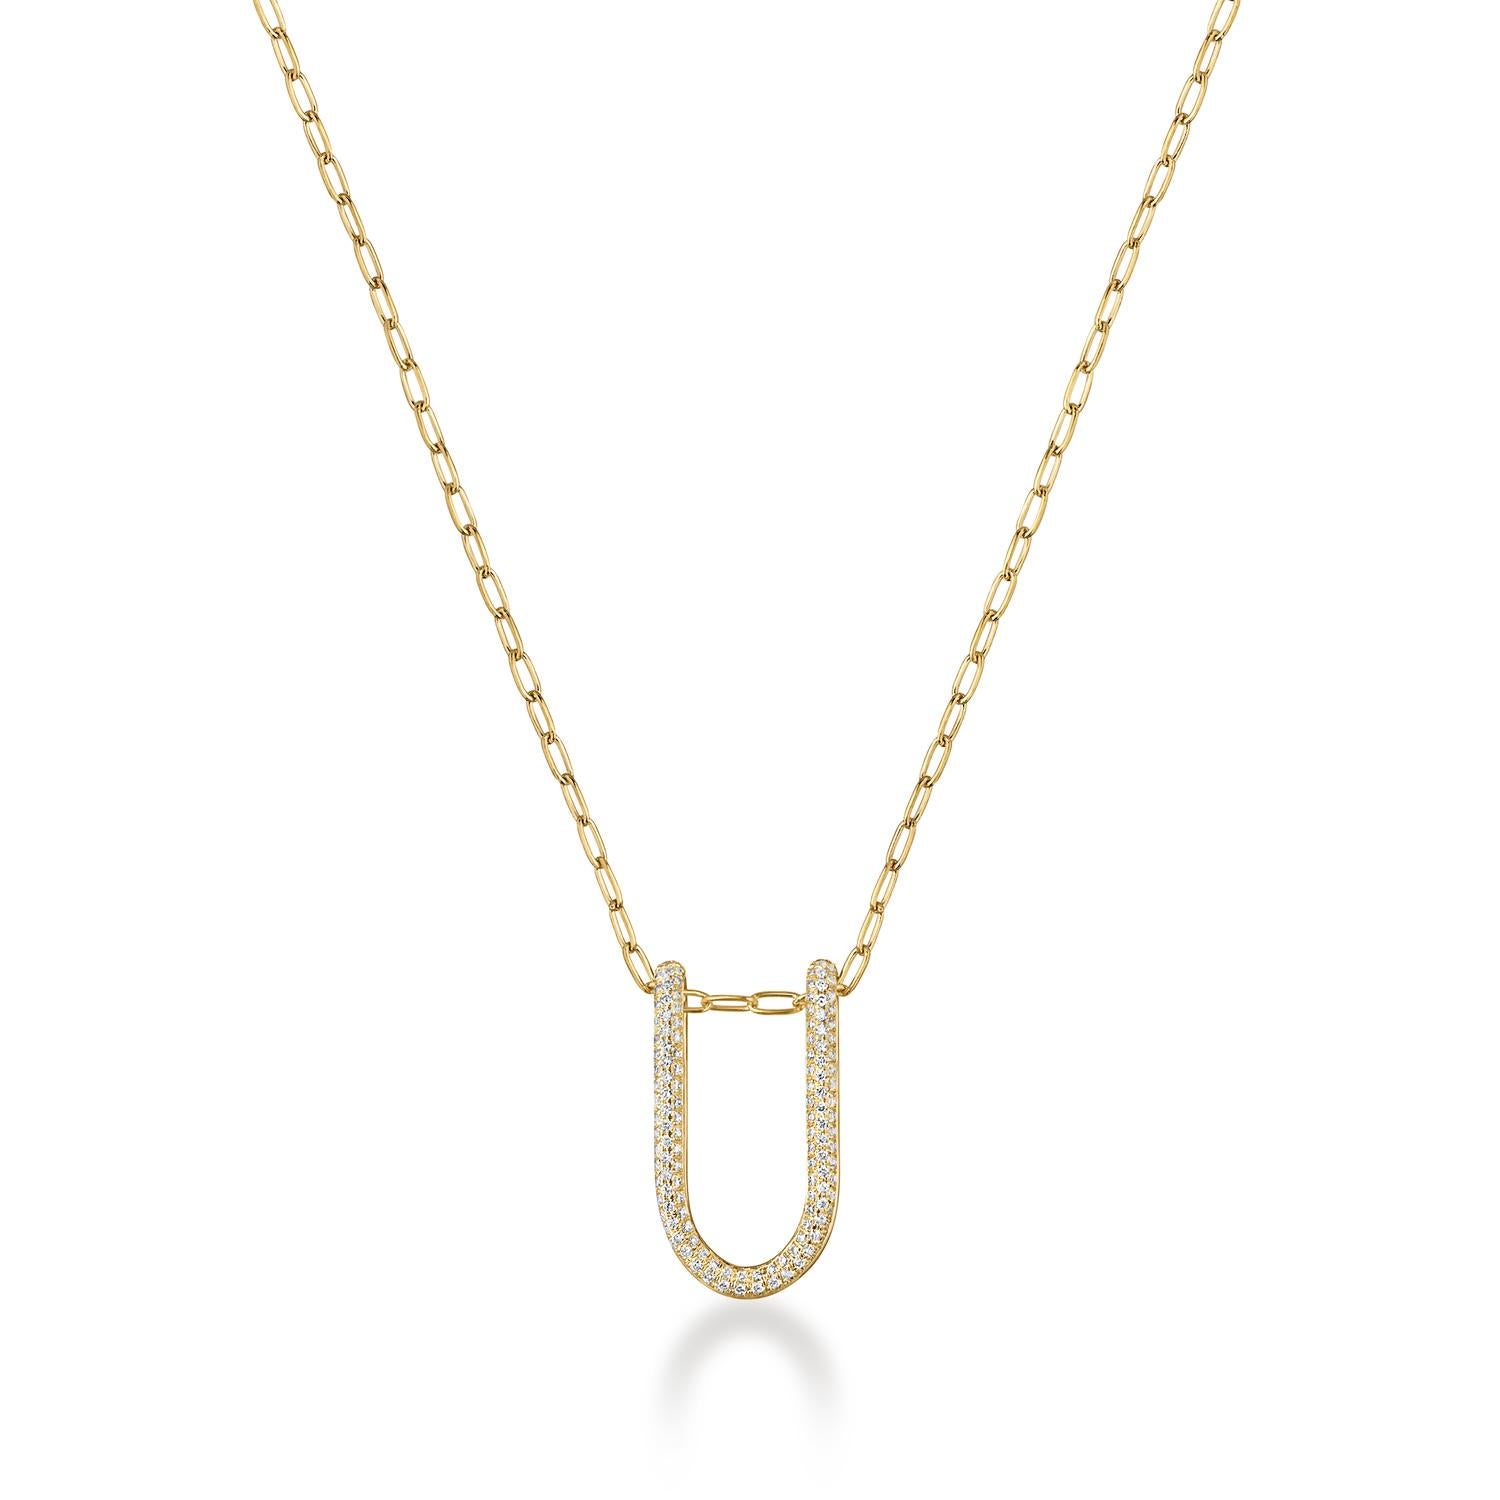 A 22mm small folded link pendant perfect to wear alone or layered. It is meticulously handcrafted with 18K solid gold with 3-rows of natural diamonds pave. 

The Mara Collection was built around the beauty of negative space and asymmetry. Each